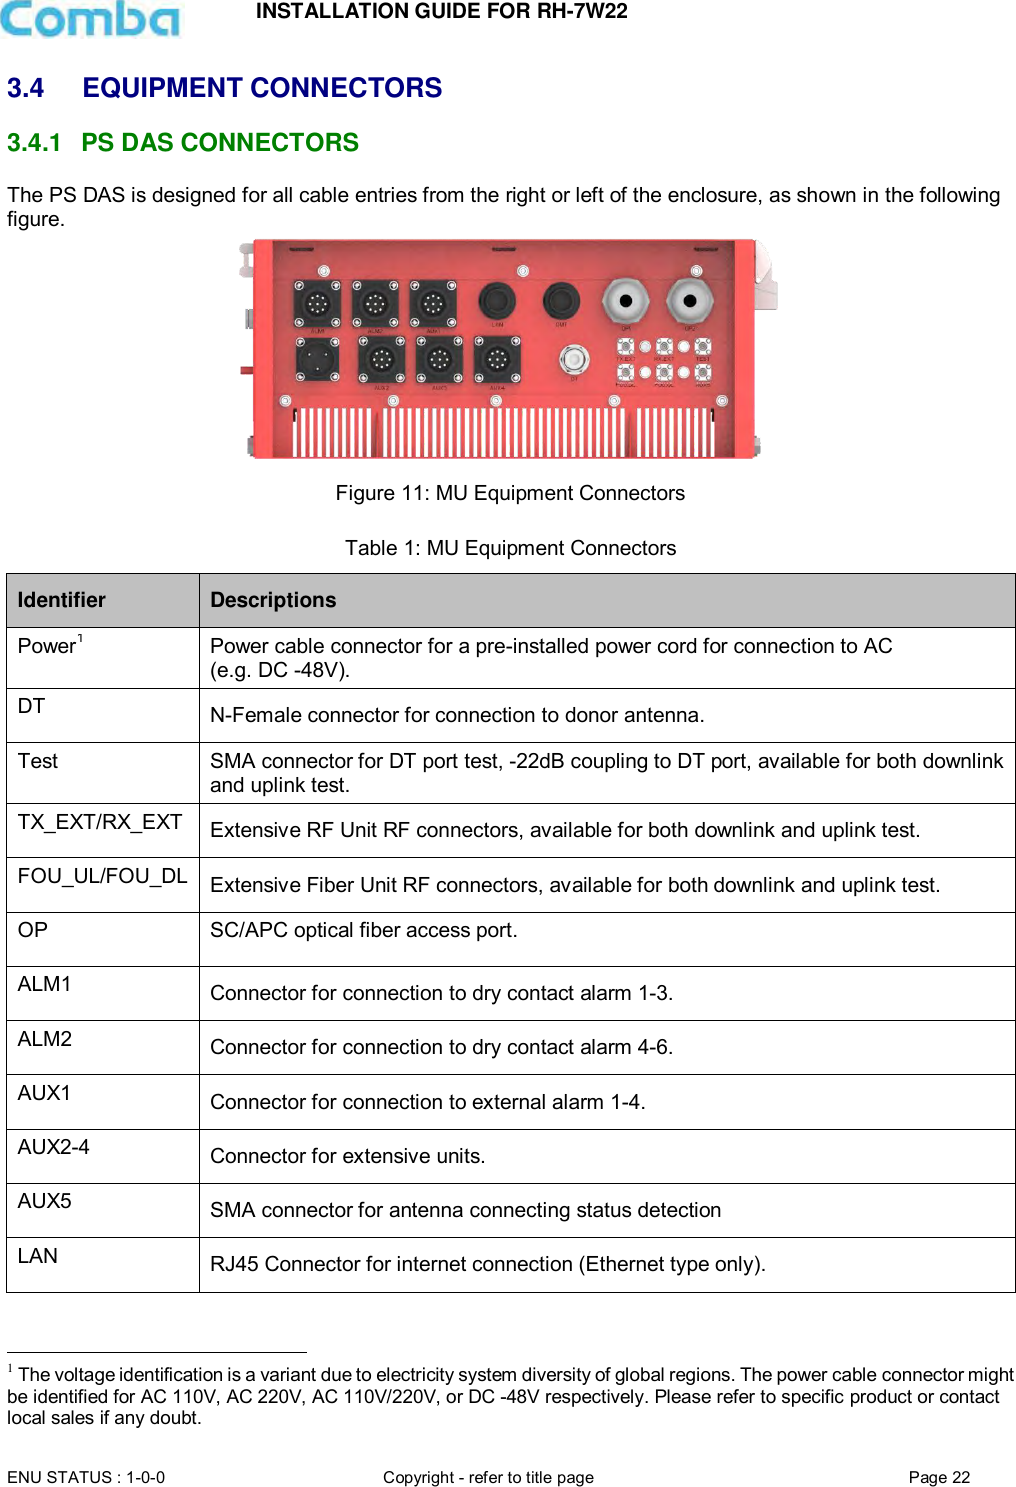 INSTALLATION GUIDE FOR RH-7W22  ENU STATUS : 1-0-0 Copyright - refer to title page Page 22     3.4 EQUIPMENT CONNECTORS 3.4.1  PS DAS CONNECTORS The PS DAS is designed for all cable entries from the right or left of the enclosure, as shown in the following figure.  Figure 11: MU Equipment Connectors  Table 1: MU Equipment Connectors Identifier Descriptions Power1 Power cable connector for a pre-installed power cord for connection to AC (e.g. DC -48V). DT N-Female connector for connection to donor antenna.  Test SMA connector for DT port test, -22dB coupling to DT port, available for both downlink and uplink test. TX_EXT/RX_EXT Extensive RF Unit RF connectors, available for both downlink and uplink test. FOU_UL/FOU_DL Extensive Fiber Unit RF connectors, available for both downlink and uplink test.  OP  SC/APC optical fiber access port. ALM1 Connector for connection to dry contact alarm 1-3. ALM2 Connector for connection to dry contact alarm 4-6. AUX1 Connector for connection to external alarm 1-4. AUX2-4 Connector for extensive units. AUX5 SMA connector for antenna connecting status detection LAN RJ45 Connector for internet connection (Ethernet type only).                                                 1 The voltage identification is a variant due to electricity system diversity of global regions. The power cable connector might be identified for AC 110V, AC 220V, AC 110V/220V, or DC -48V respectively. Please refer to specific product or contact local sales if any doubt. 